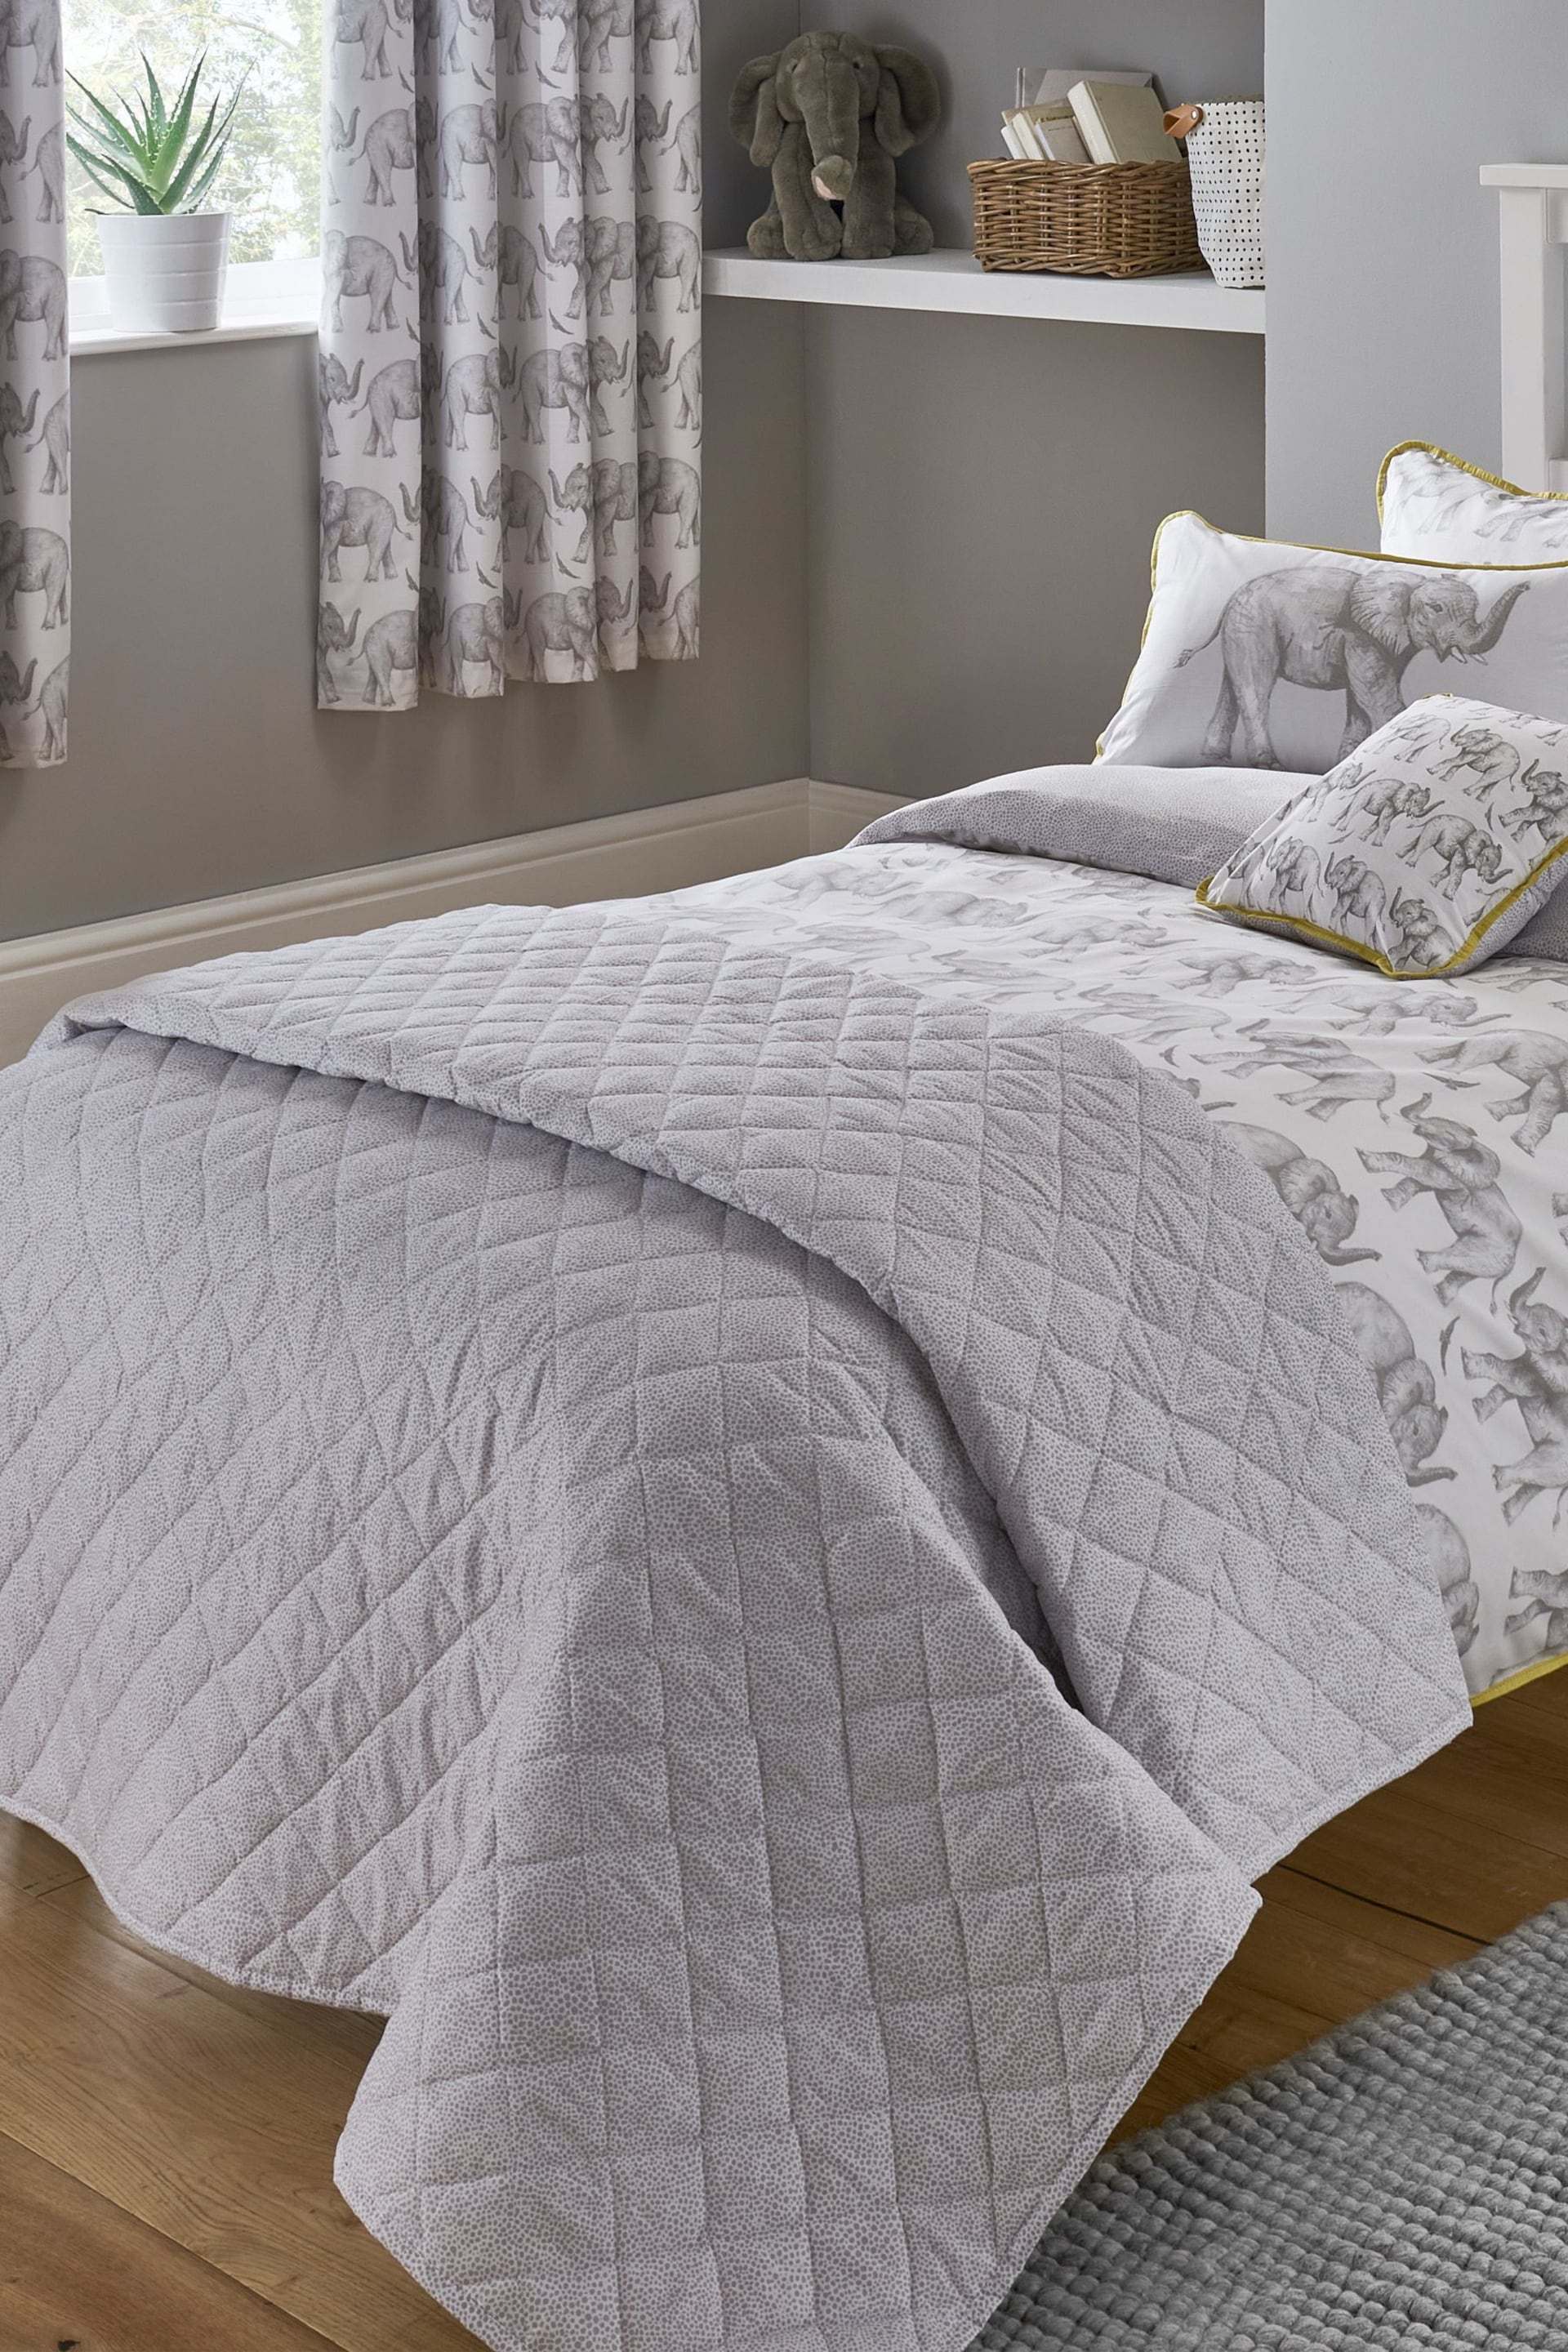 Sam Faiers Little Knightley's White Kids Quilted Throw - Image 1 of 2